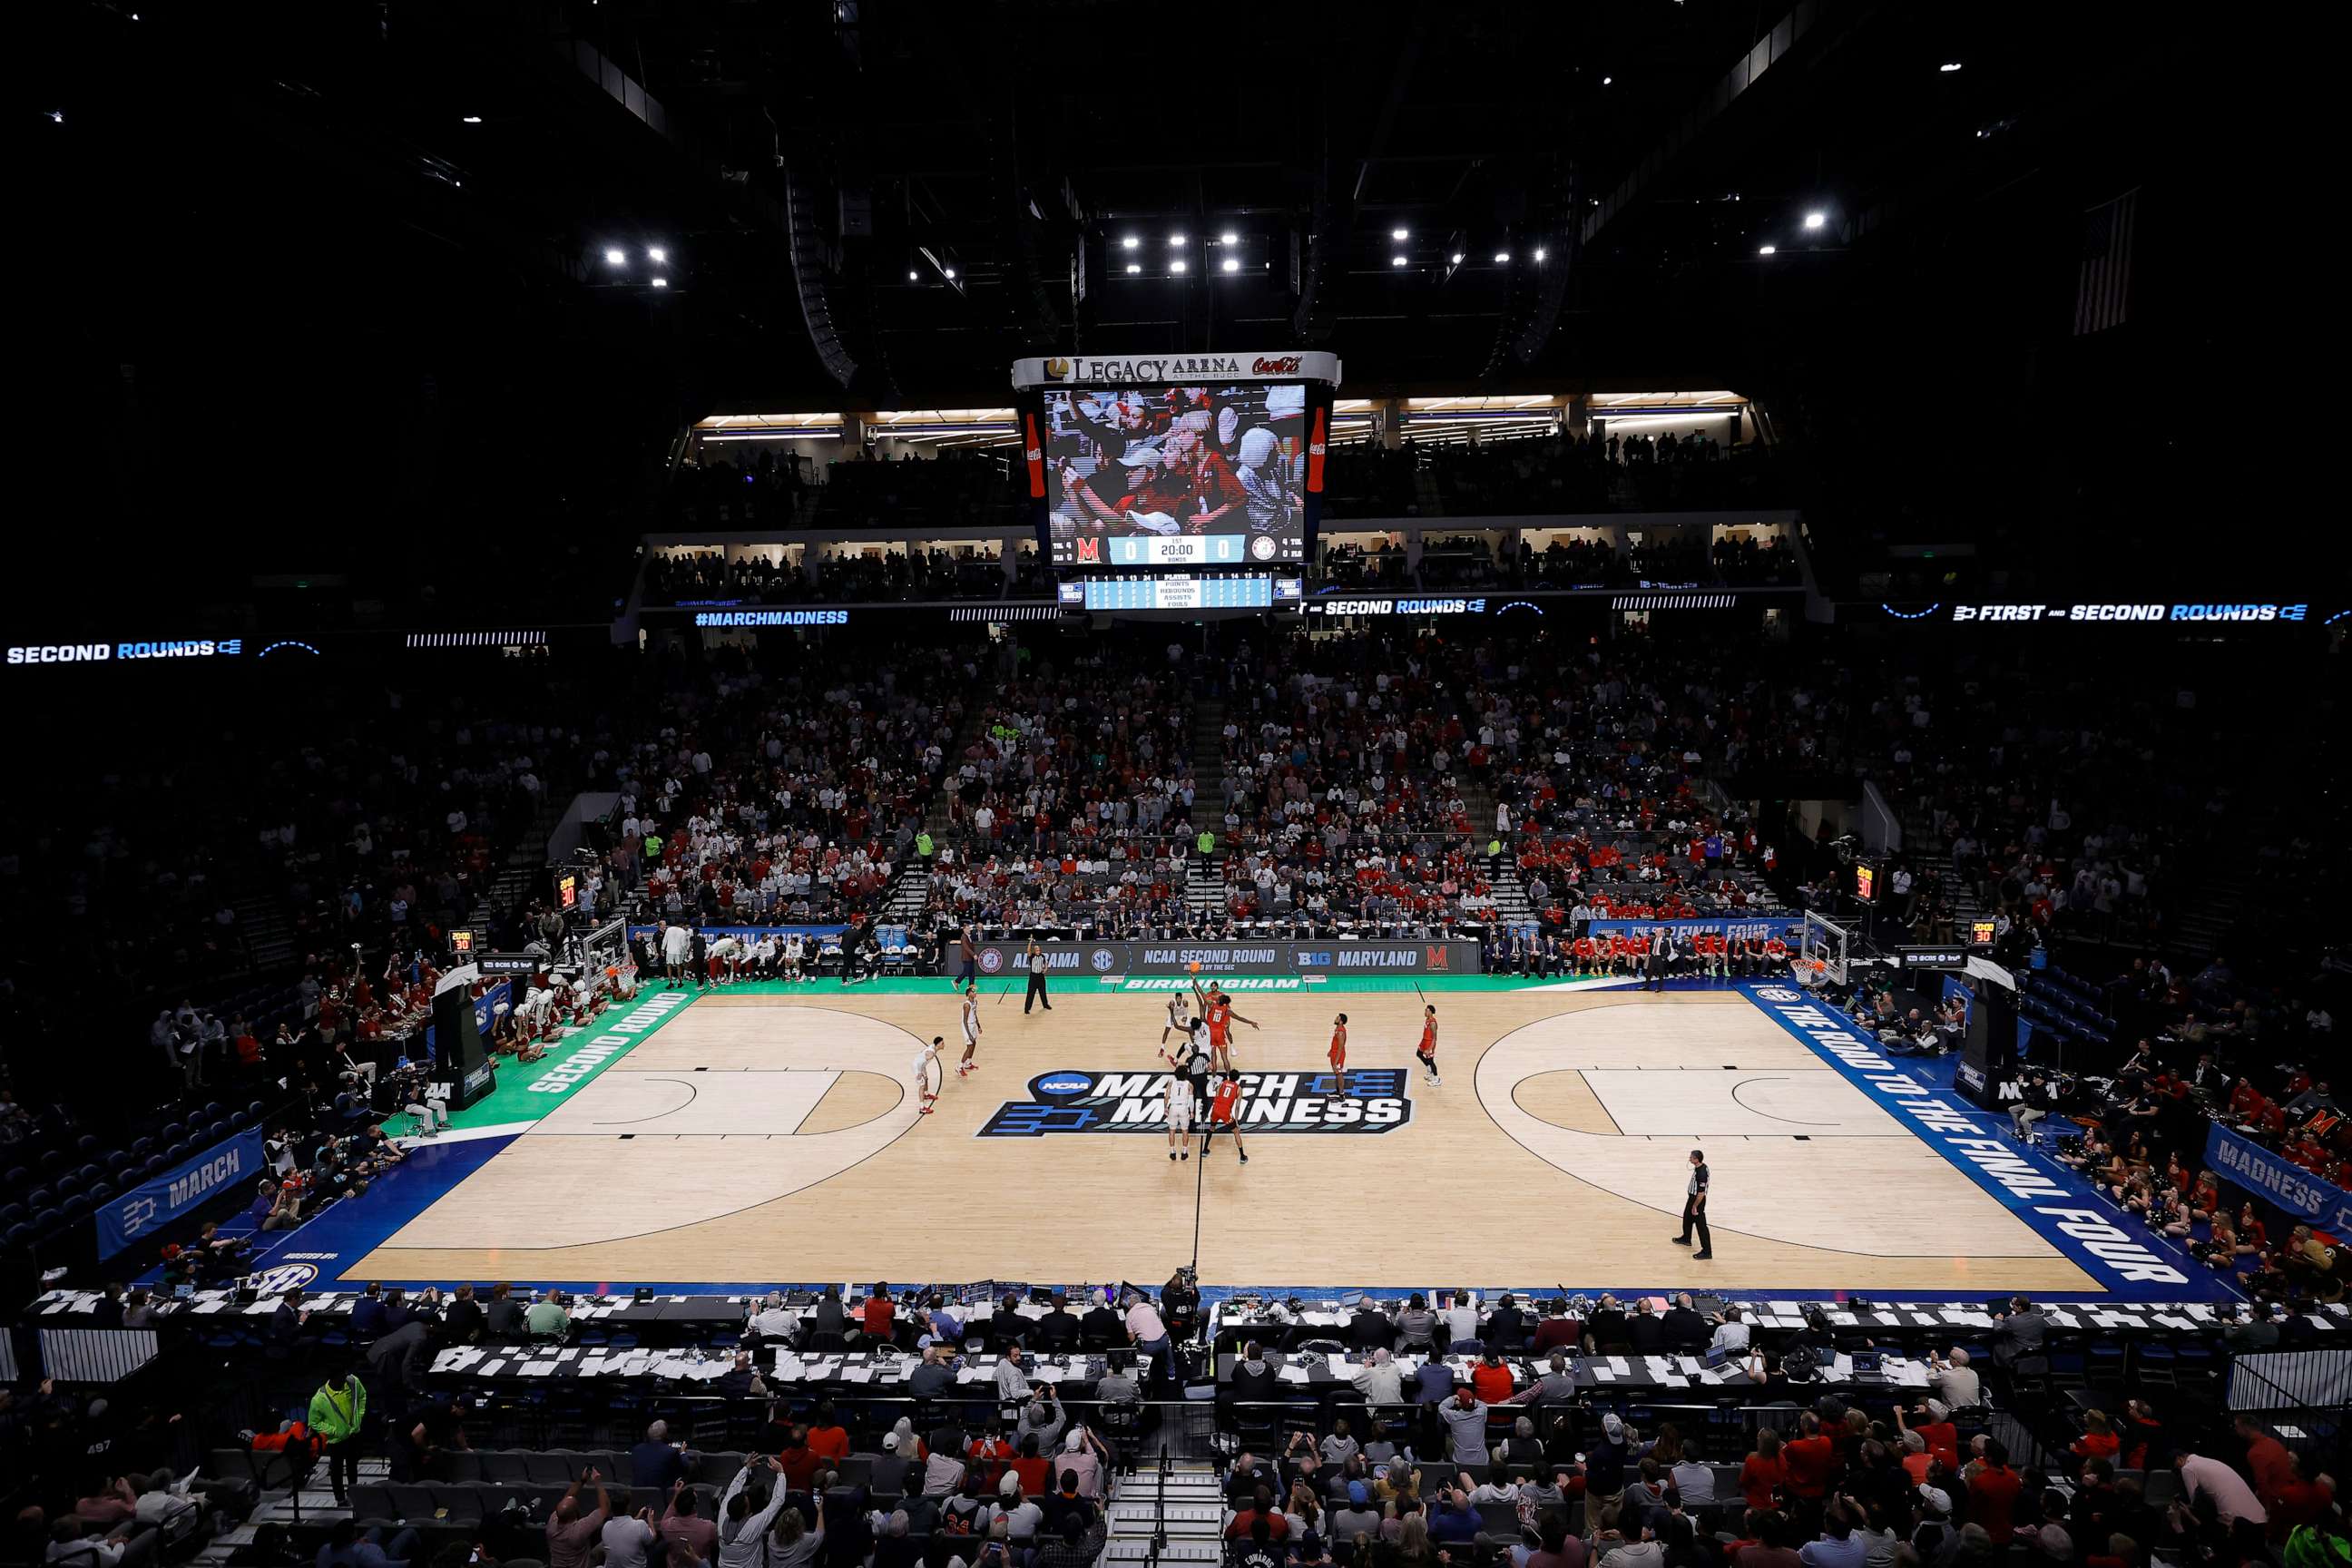 PHOTO: A view of Legacy Arena during the first half between the Maryland Terrapins and Alabama Crimson Tide in the second round of the NCAA Men's Basketball Tournament, Mar. 18, 2023, in Birmingham.